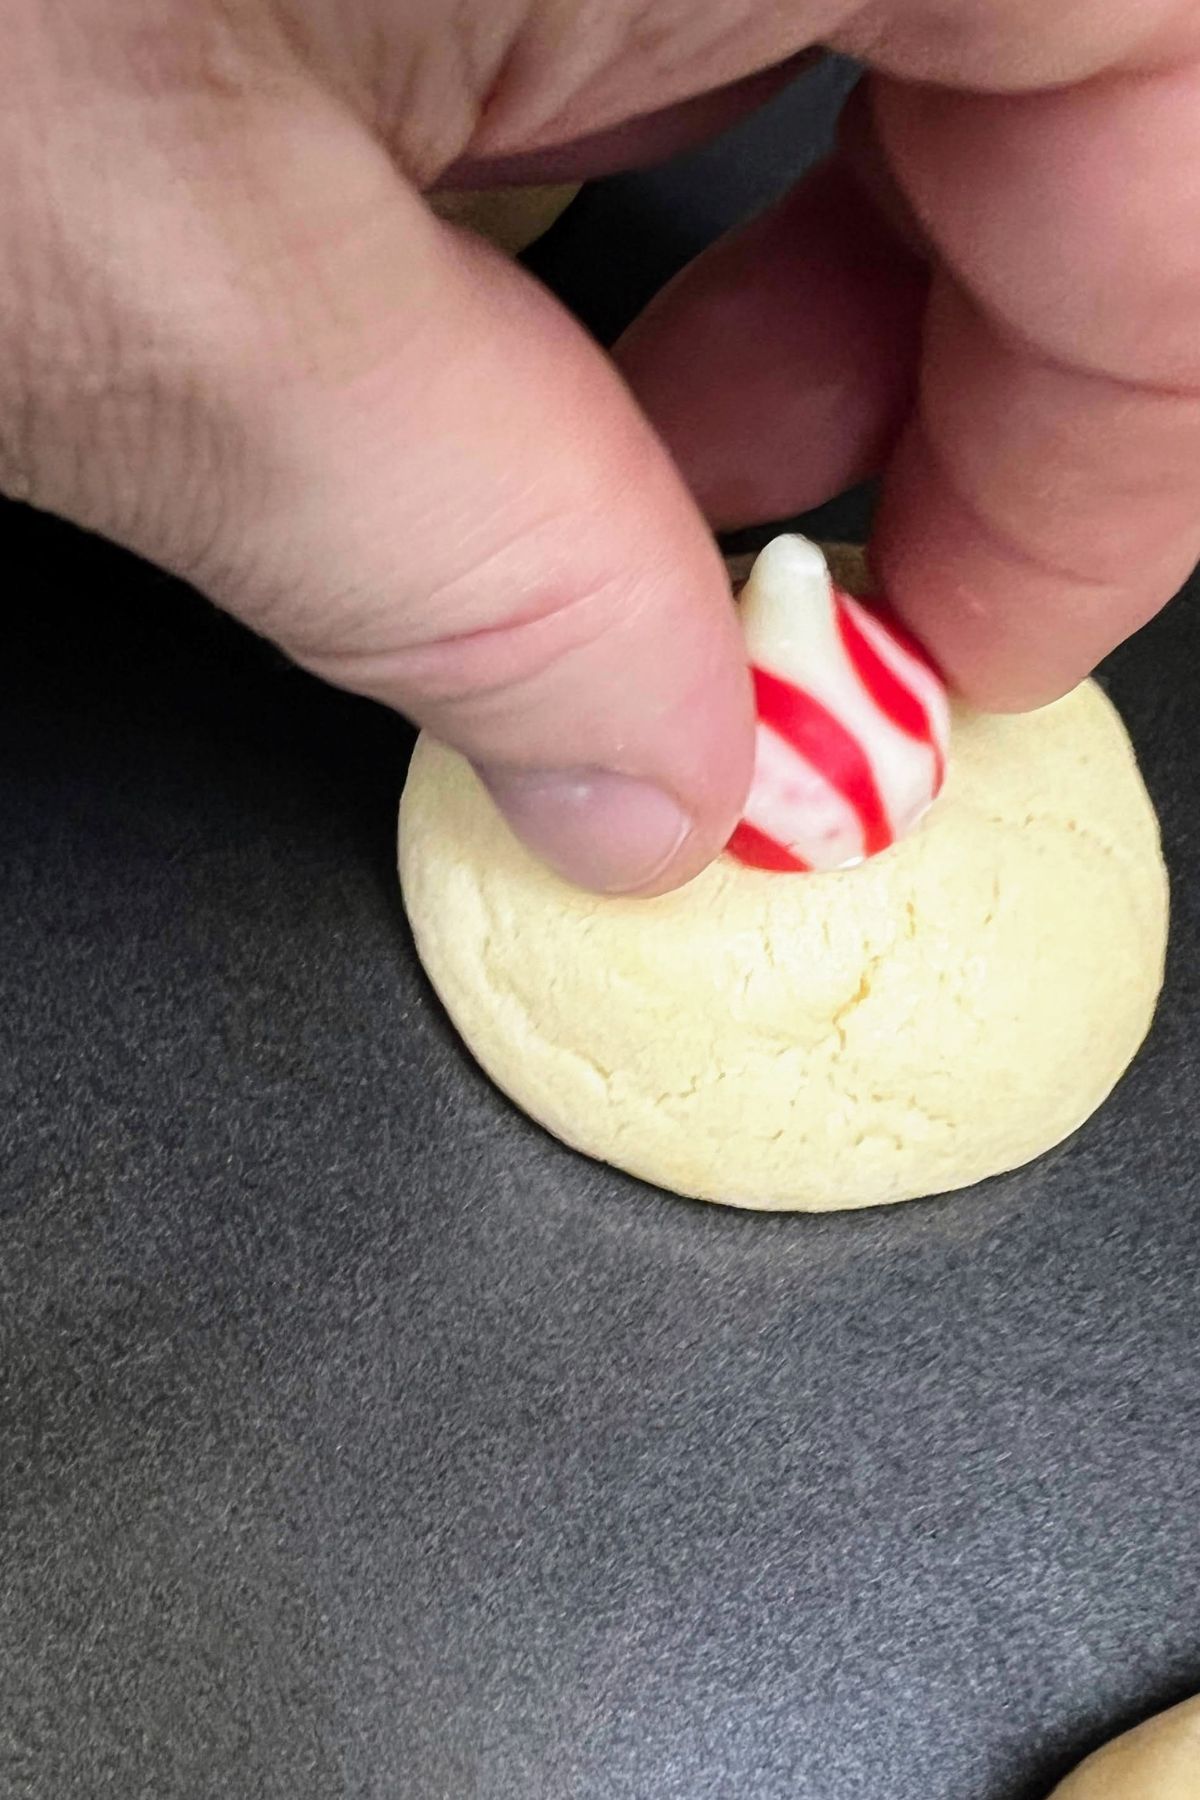 Adding a hershey kiss to a baked sugar cookie.